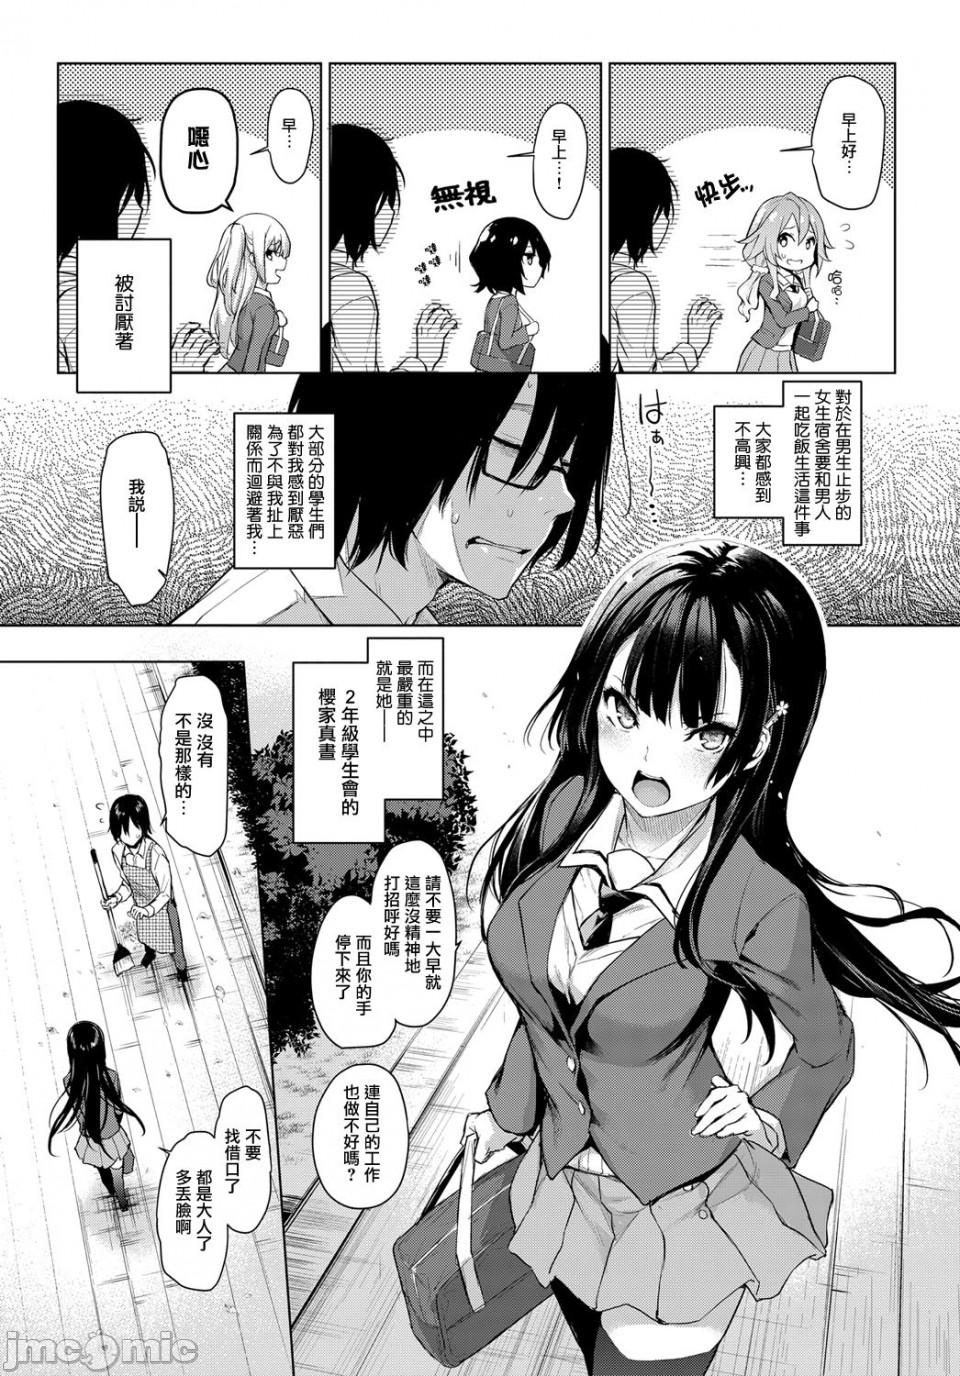 Old Young 姉体験女学寮1-11  - Page 7